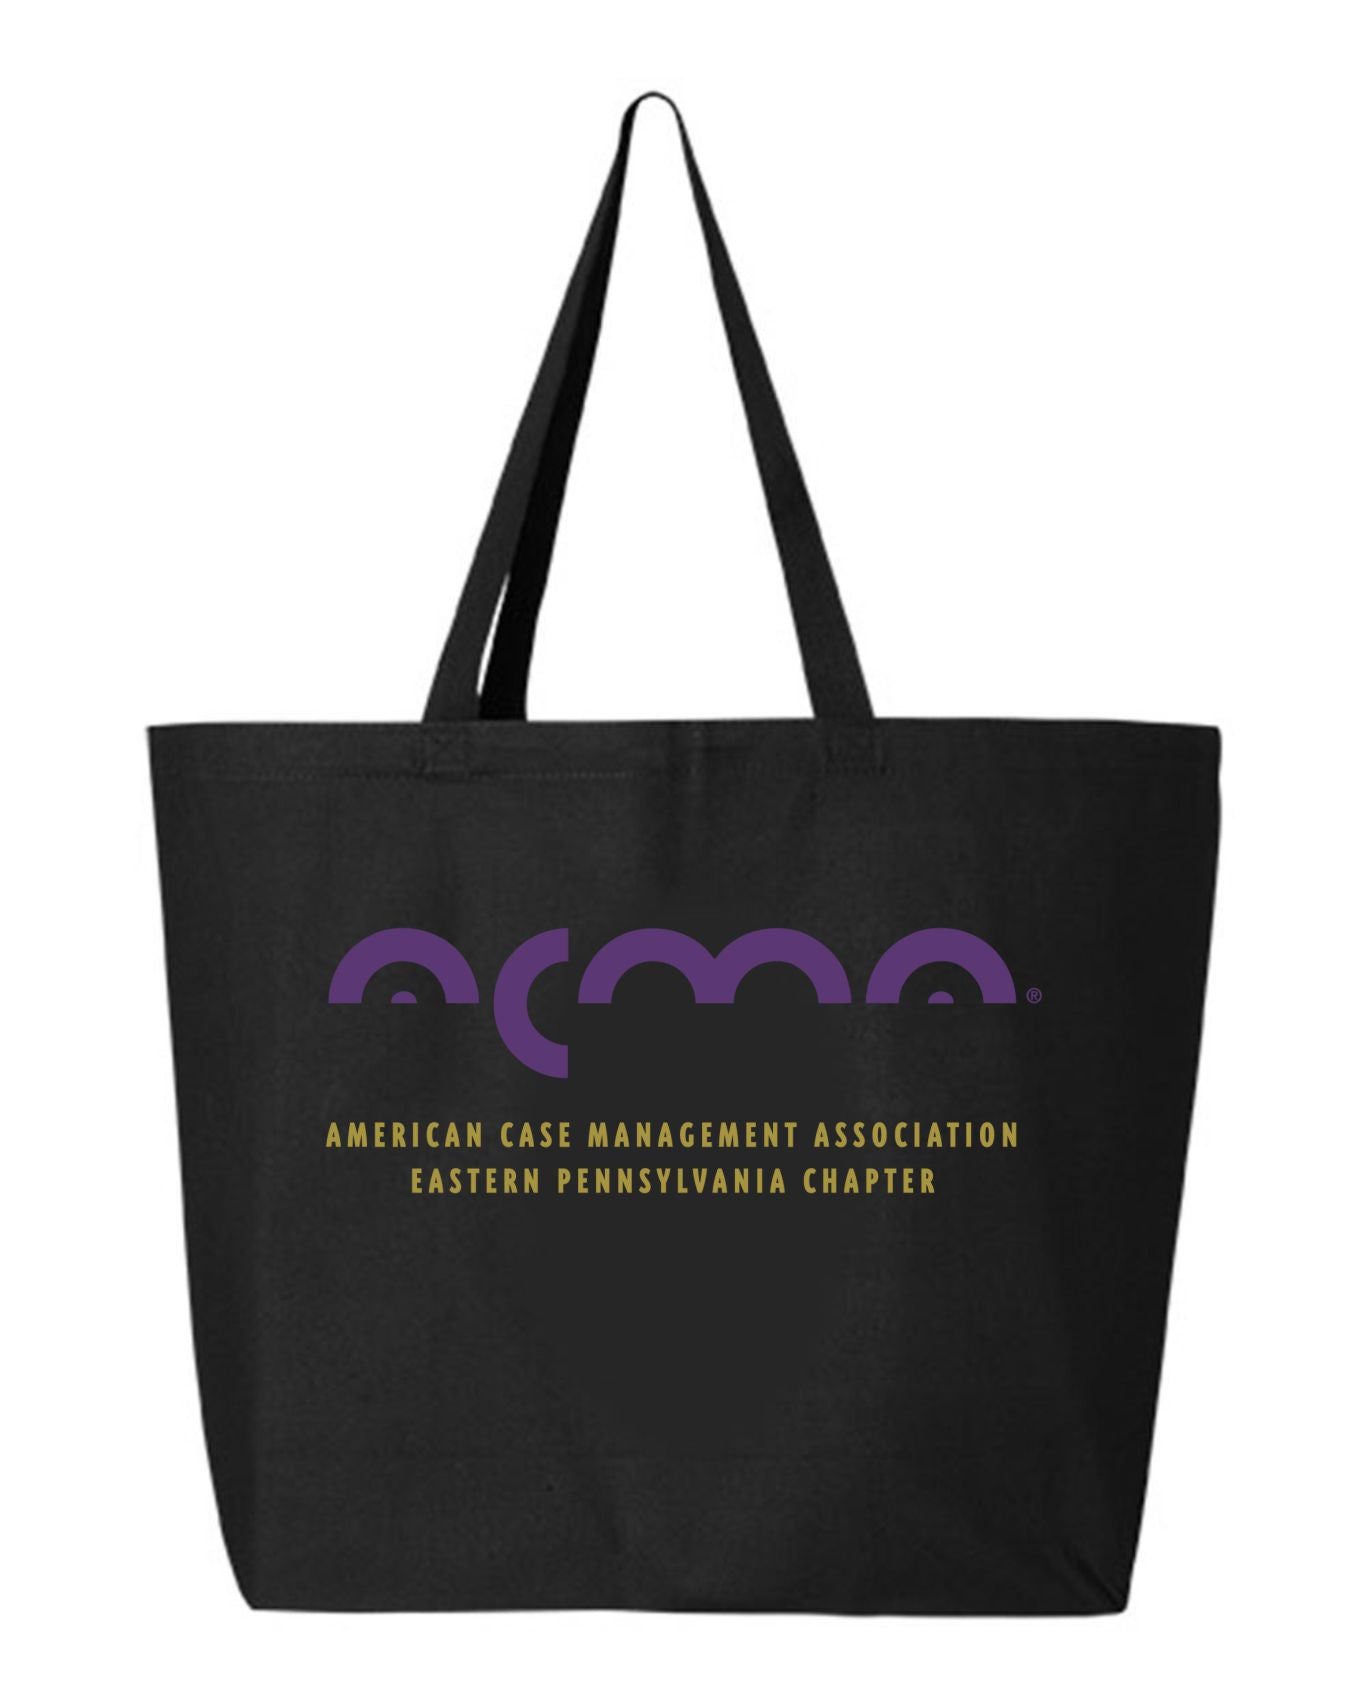 ACMA Tote Bag - Stylish and Practical Carryall